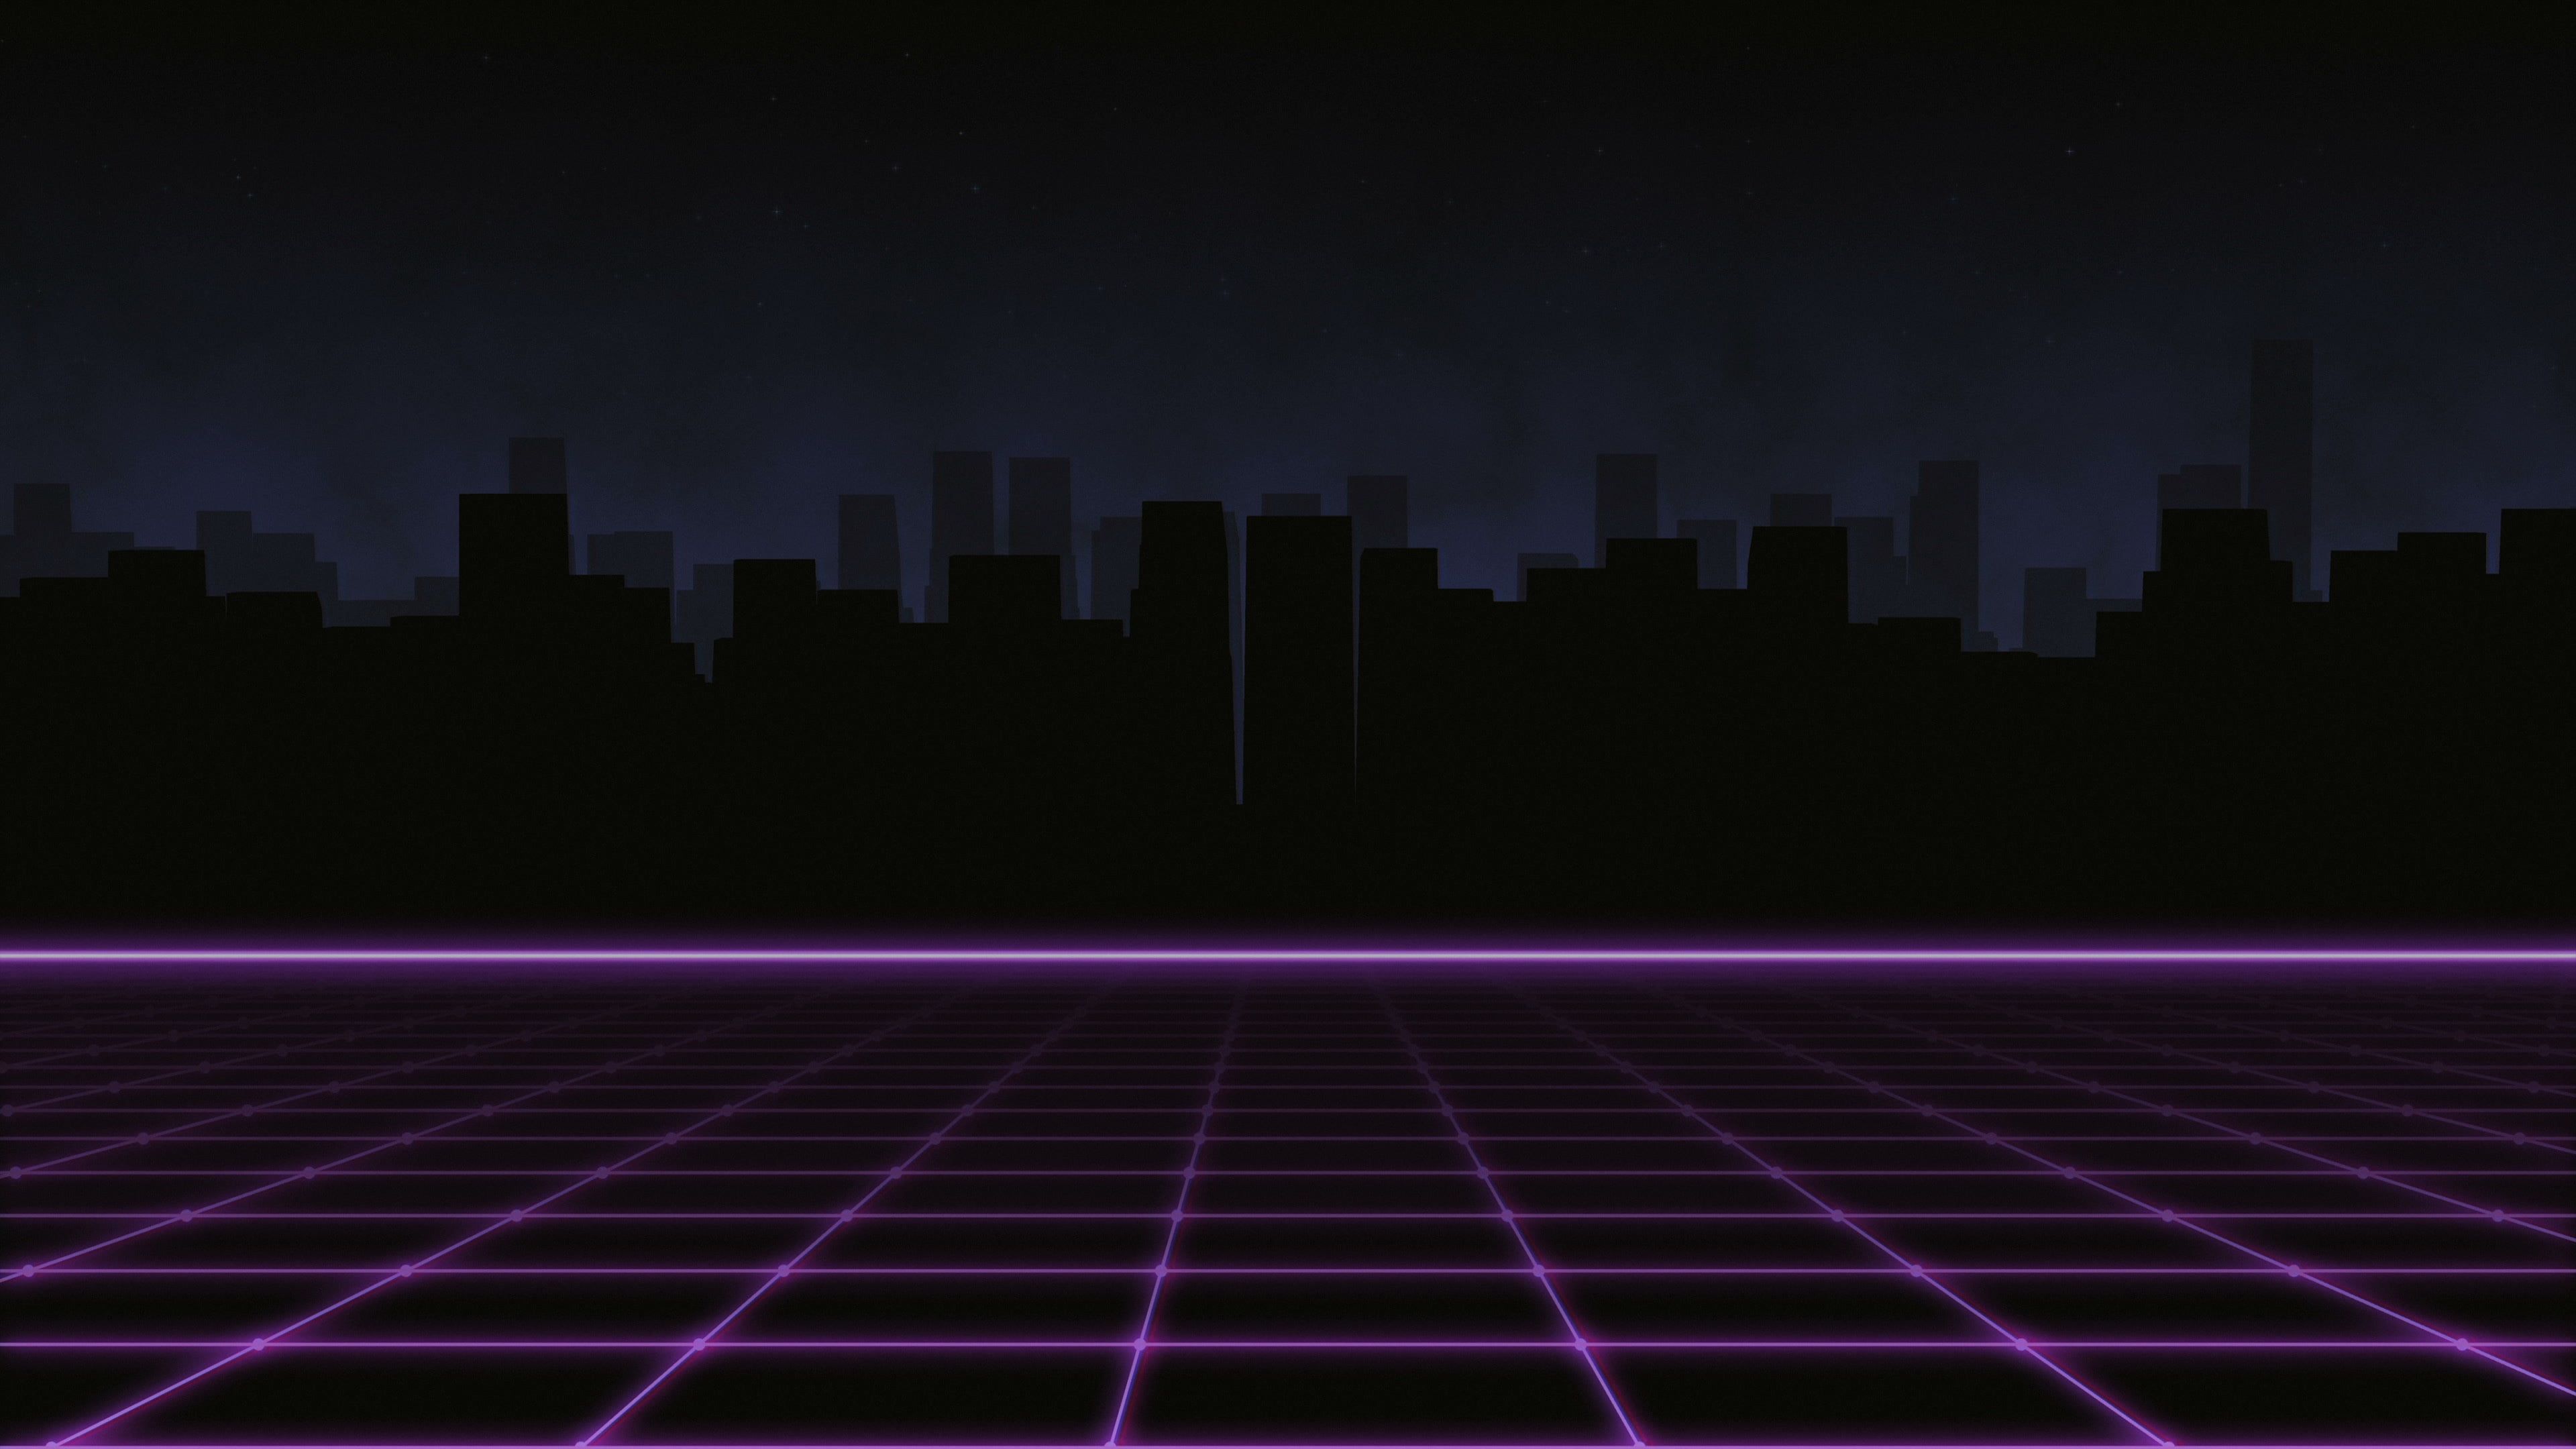 Music The city #Silhouette #Background s #Neon 's #Synth